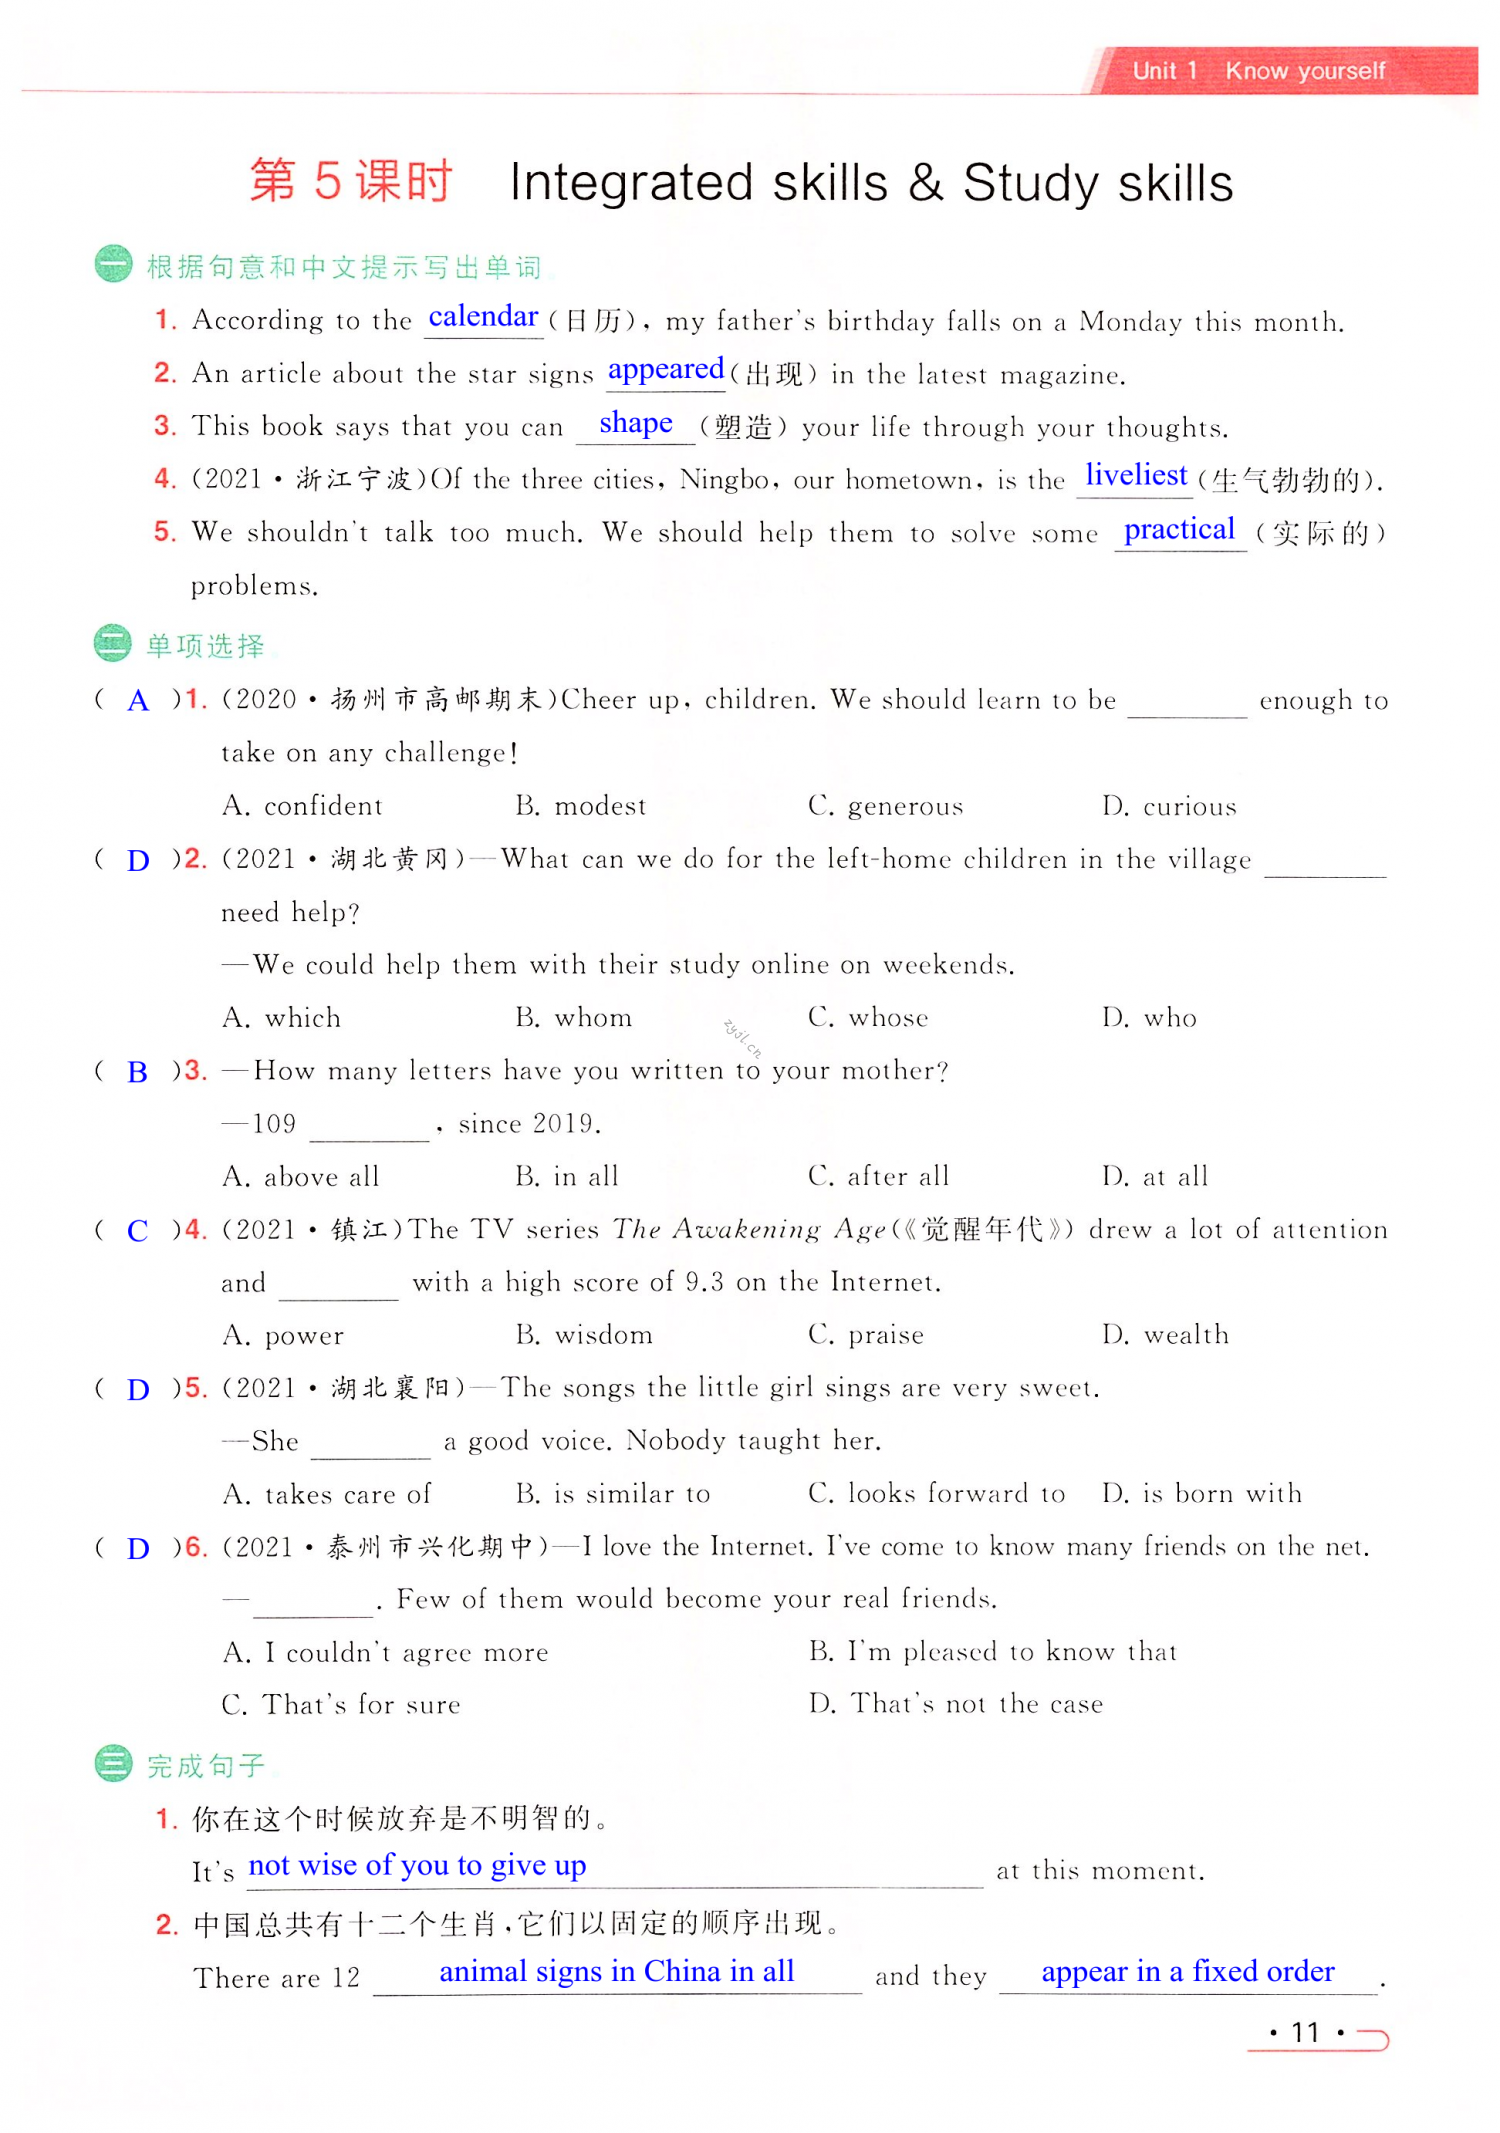 Unit 1 Know yourself - 第11页